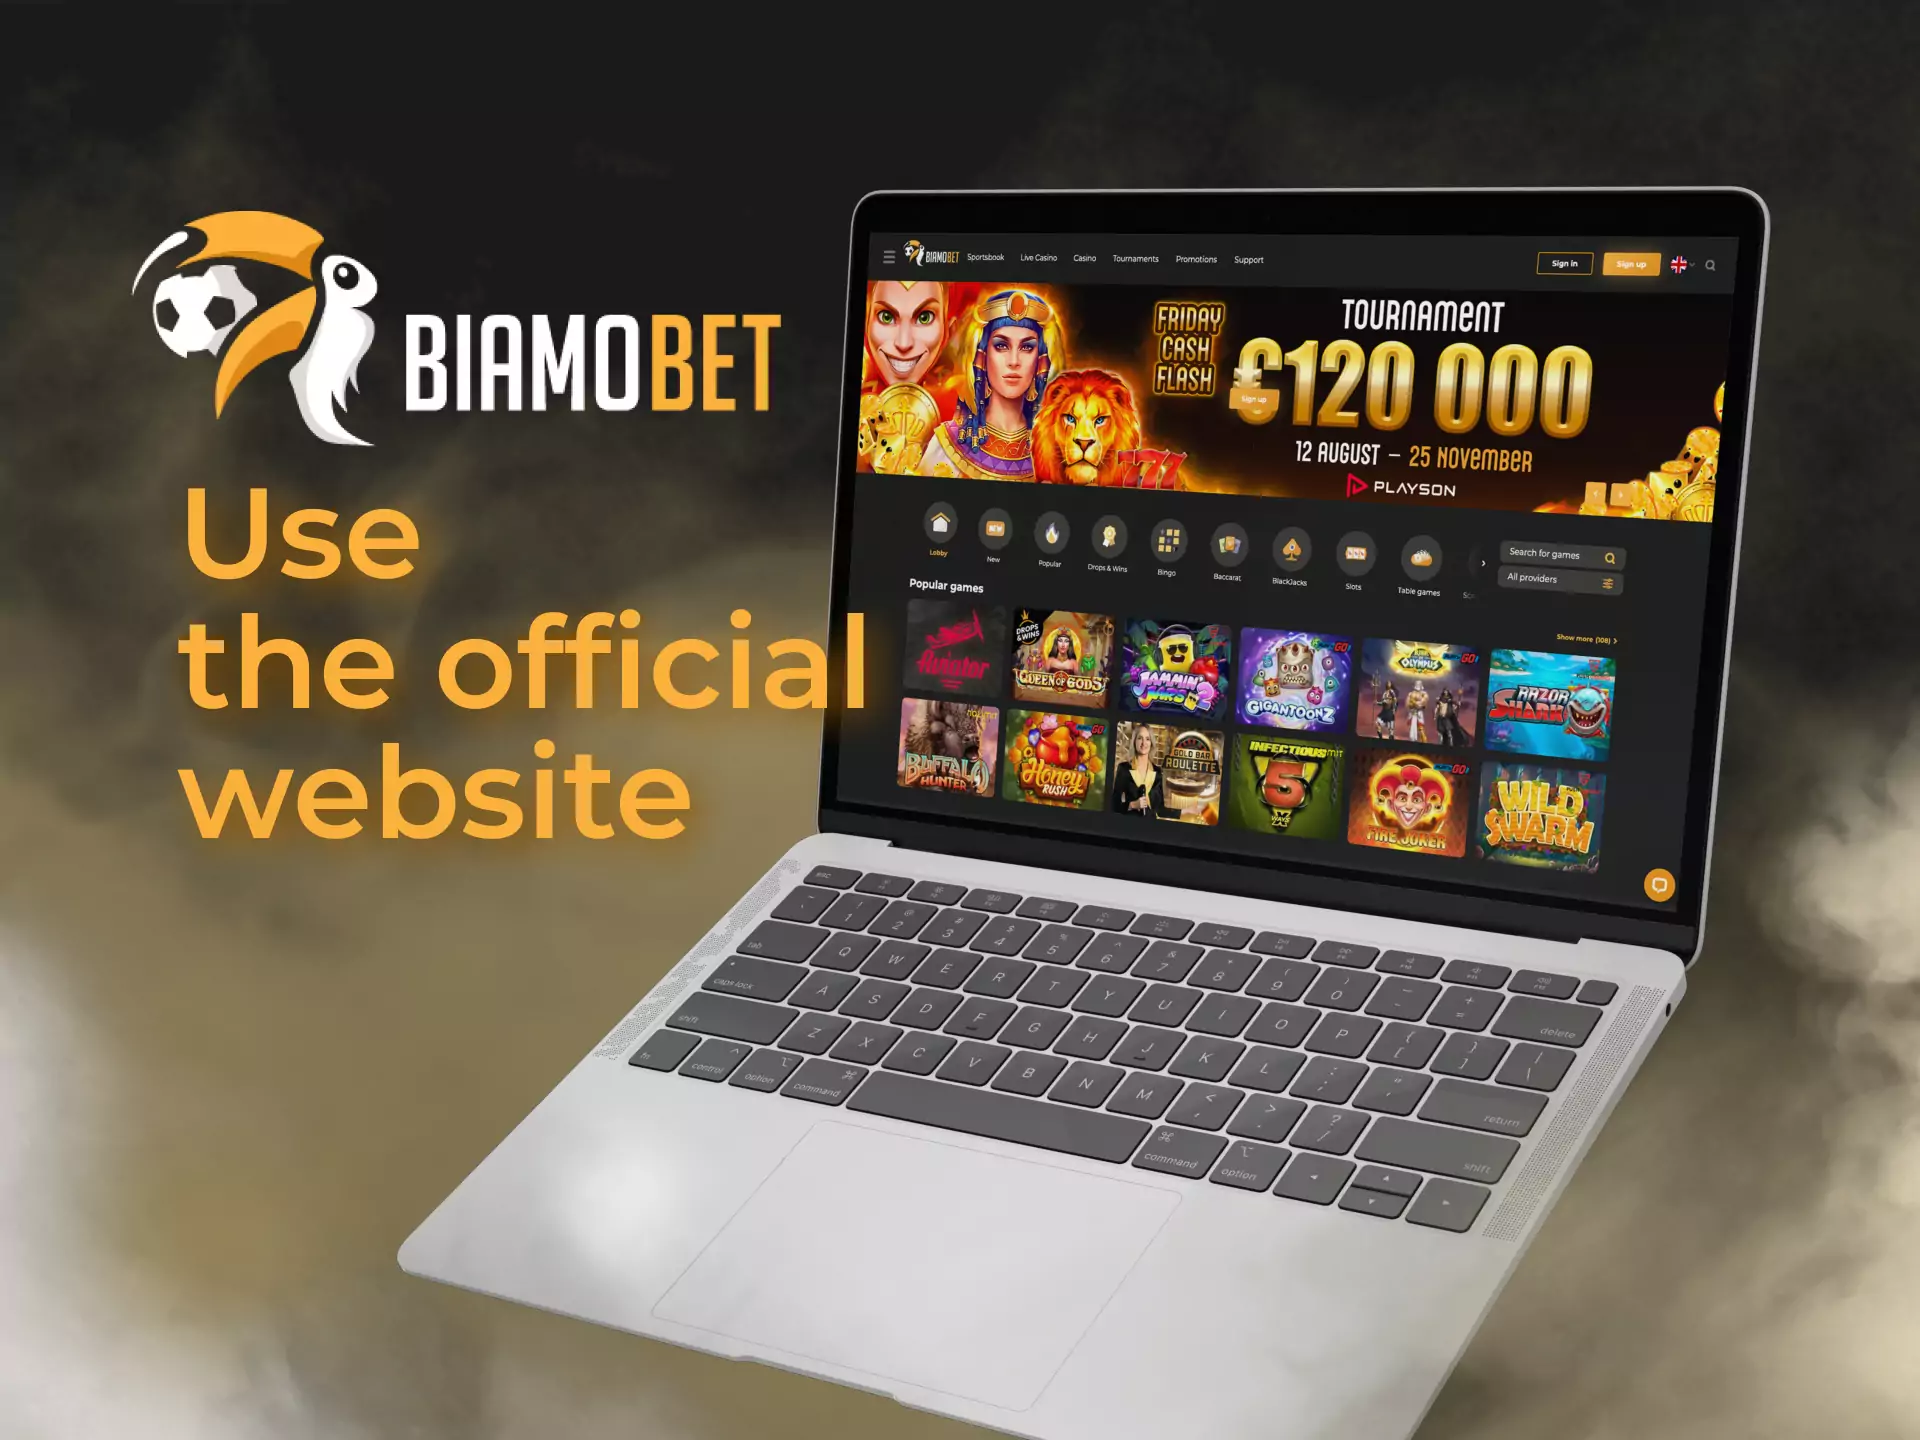 Since there is no PC client neither for Windows nor for macOS, use the Biamobet website.